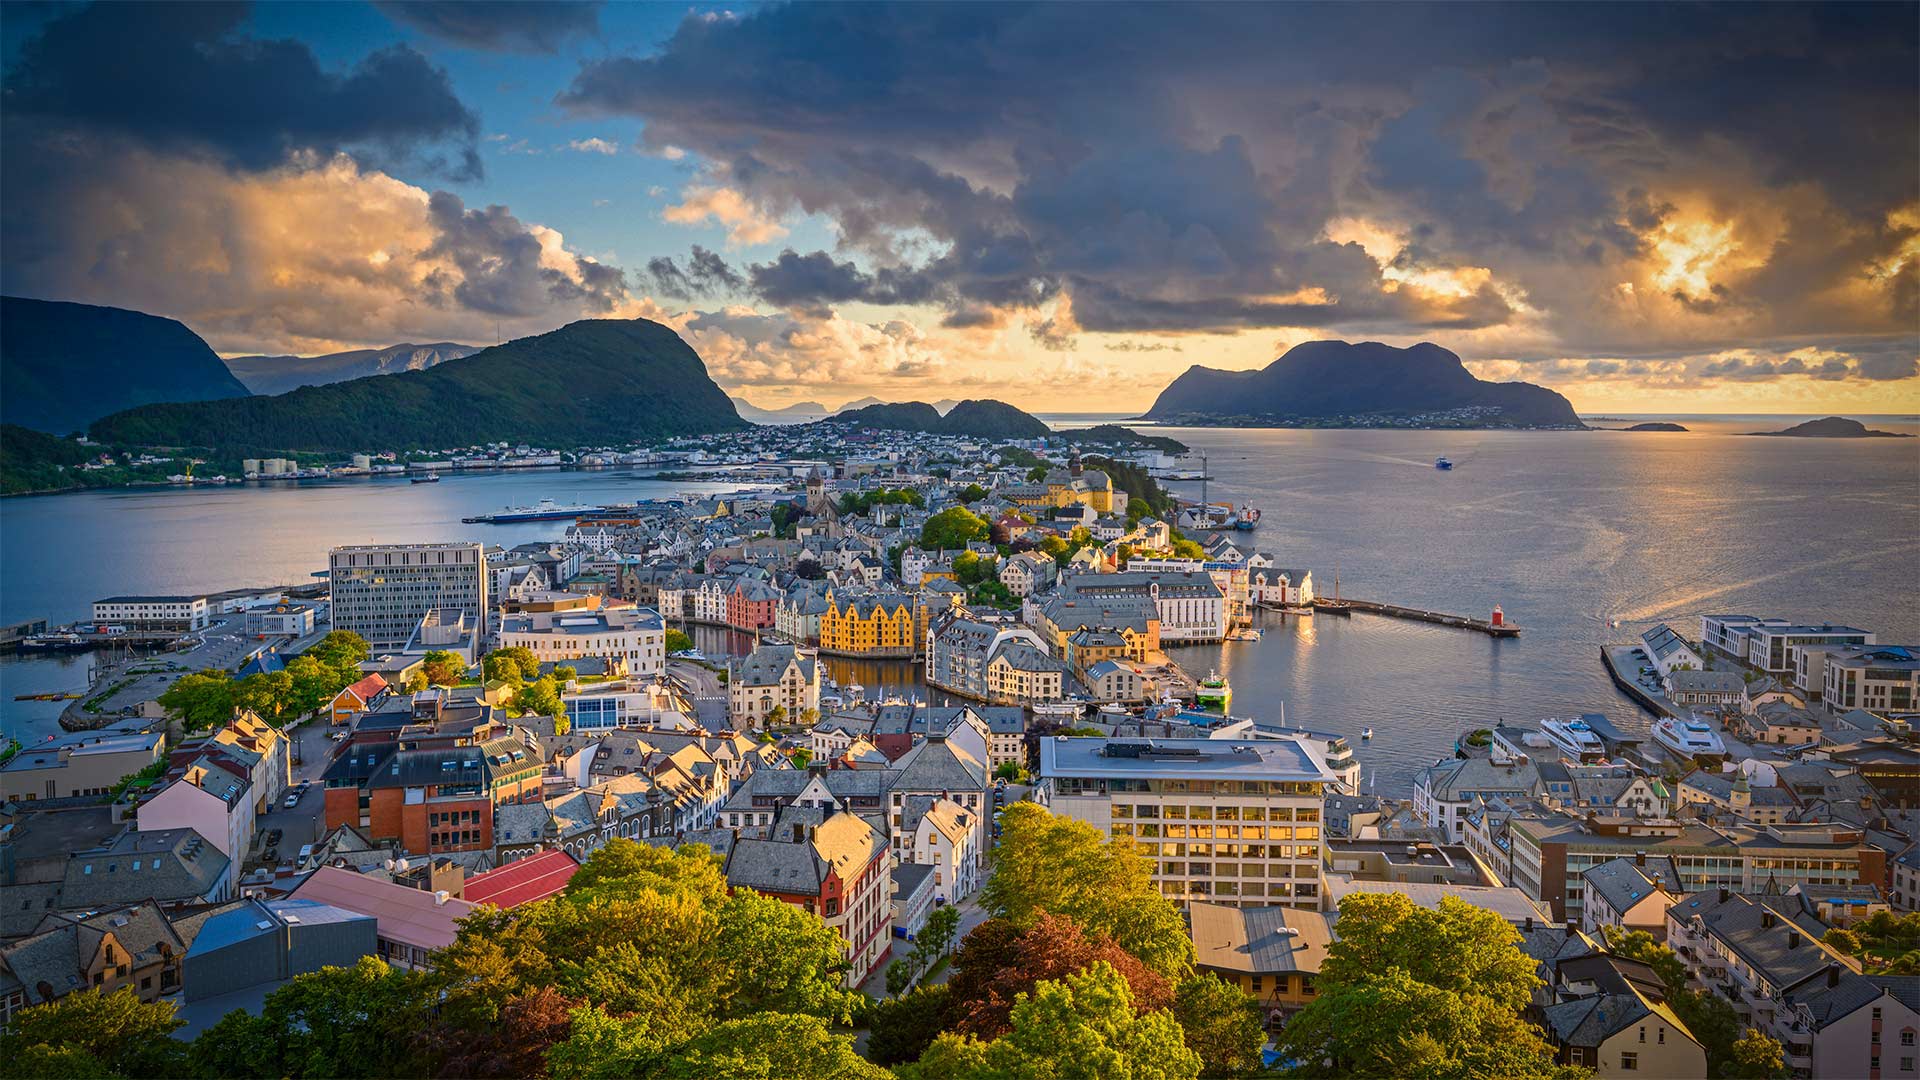 Ålesund, Norway - AWL Images/Offset by Shutterstock)